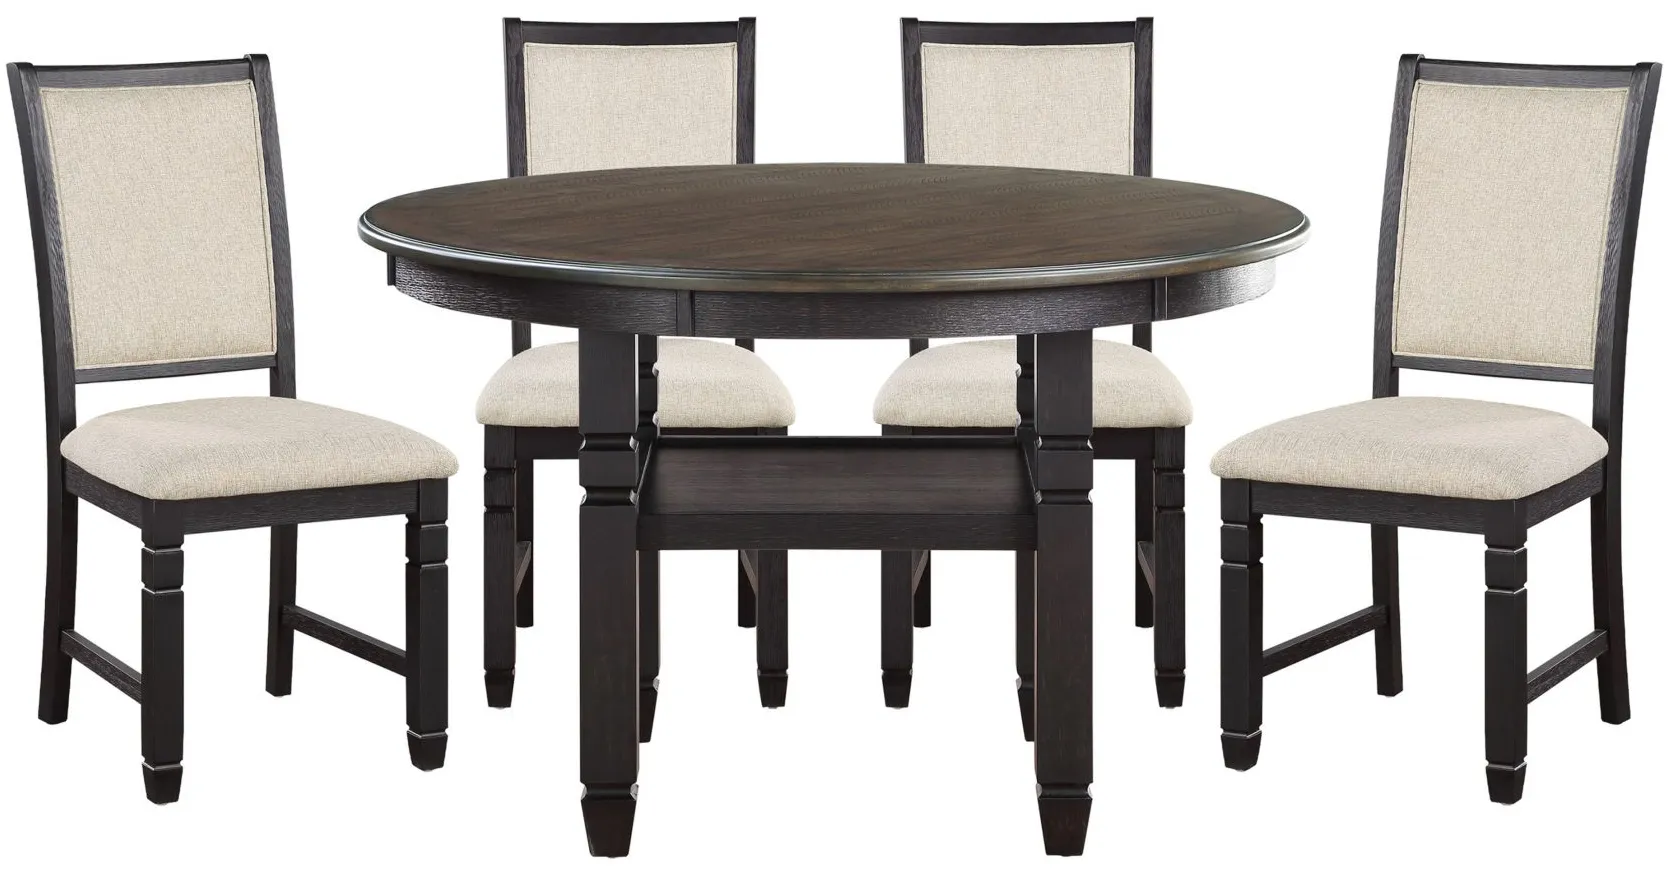 Arlana 5-pc. Dining Set in Black by Homelegance